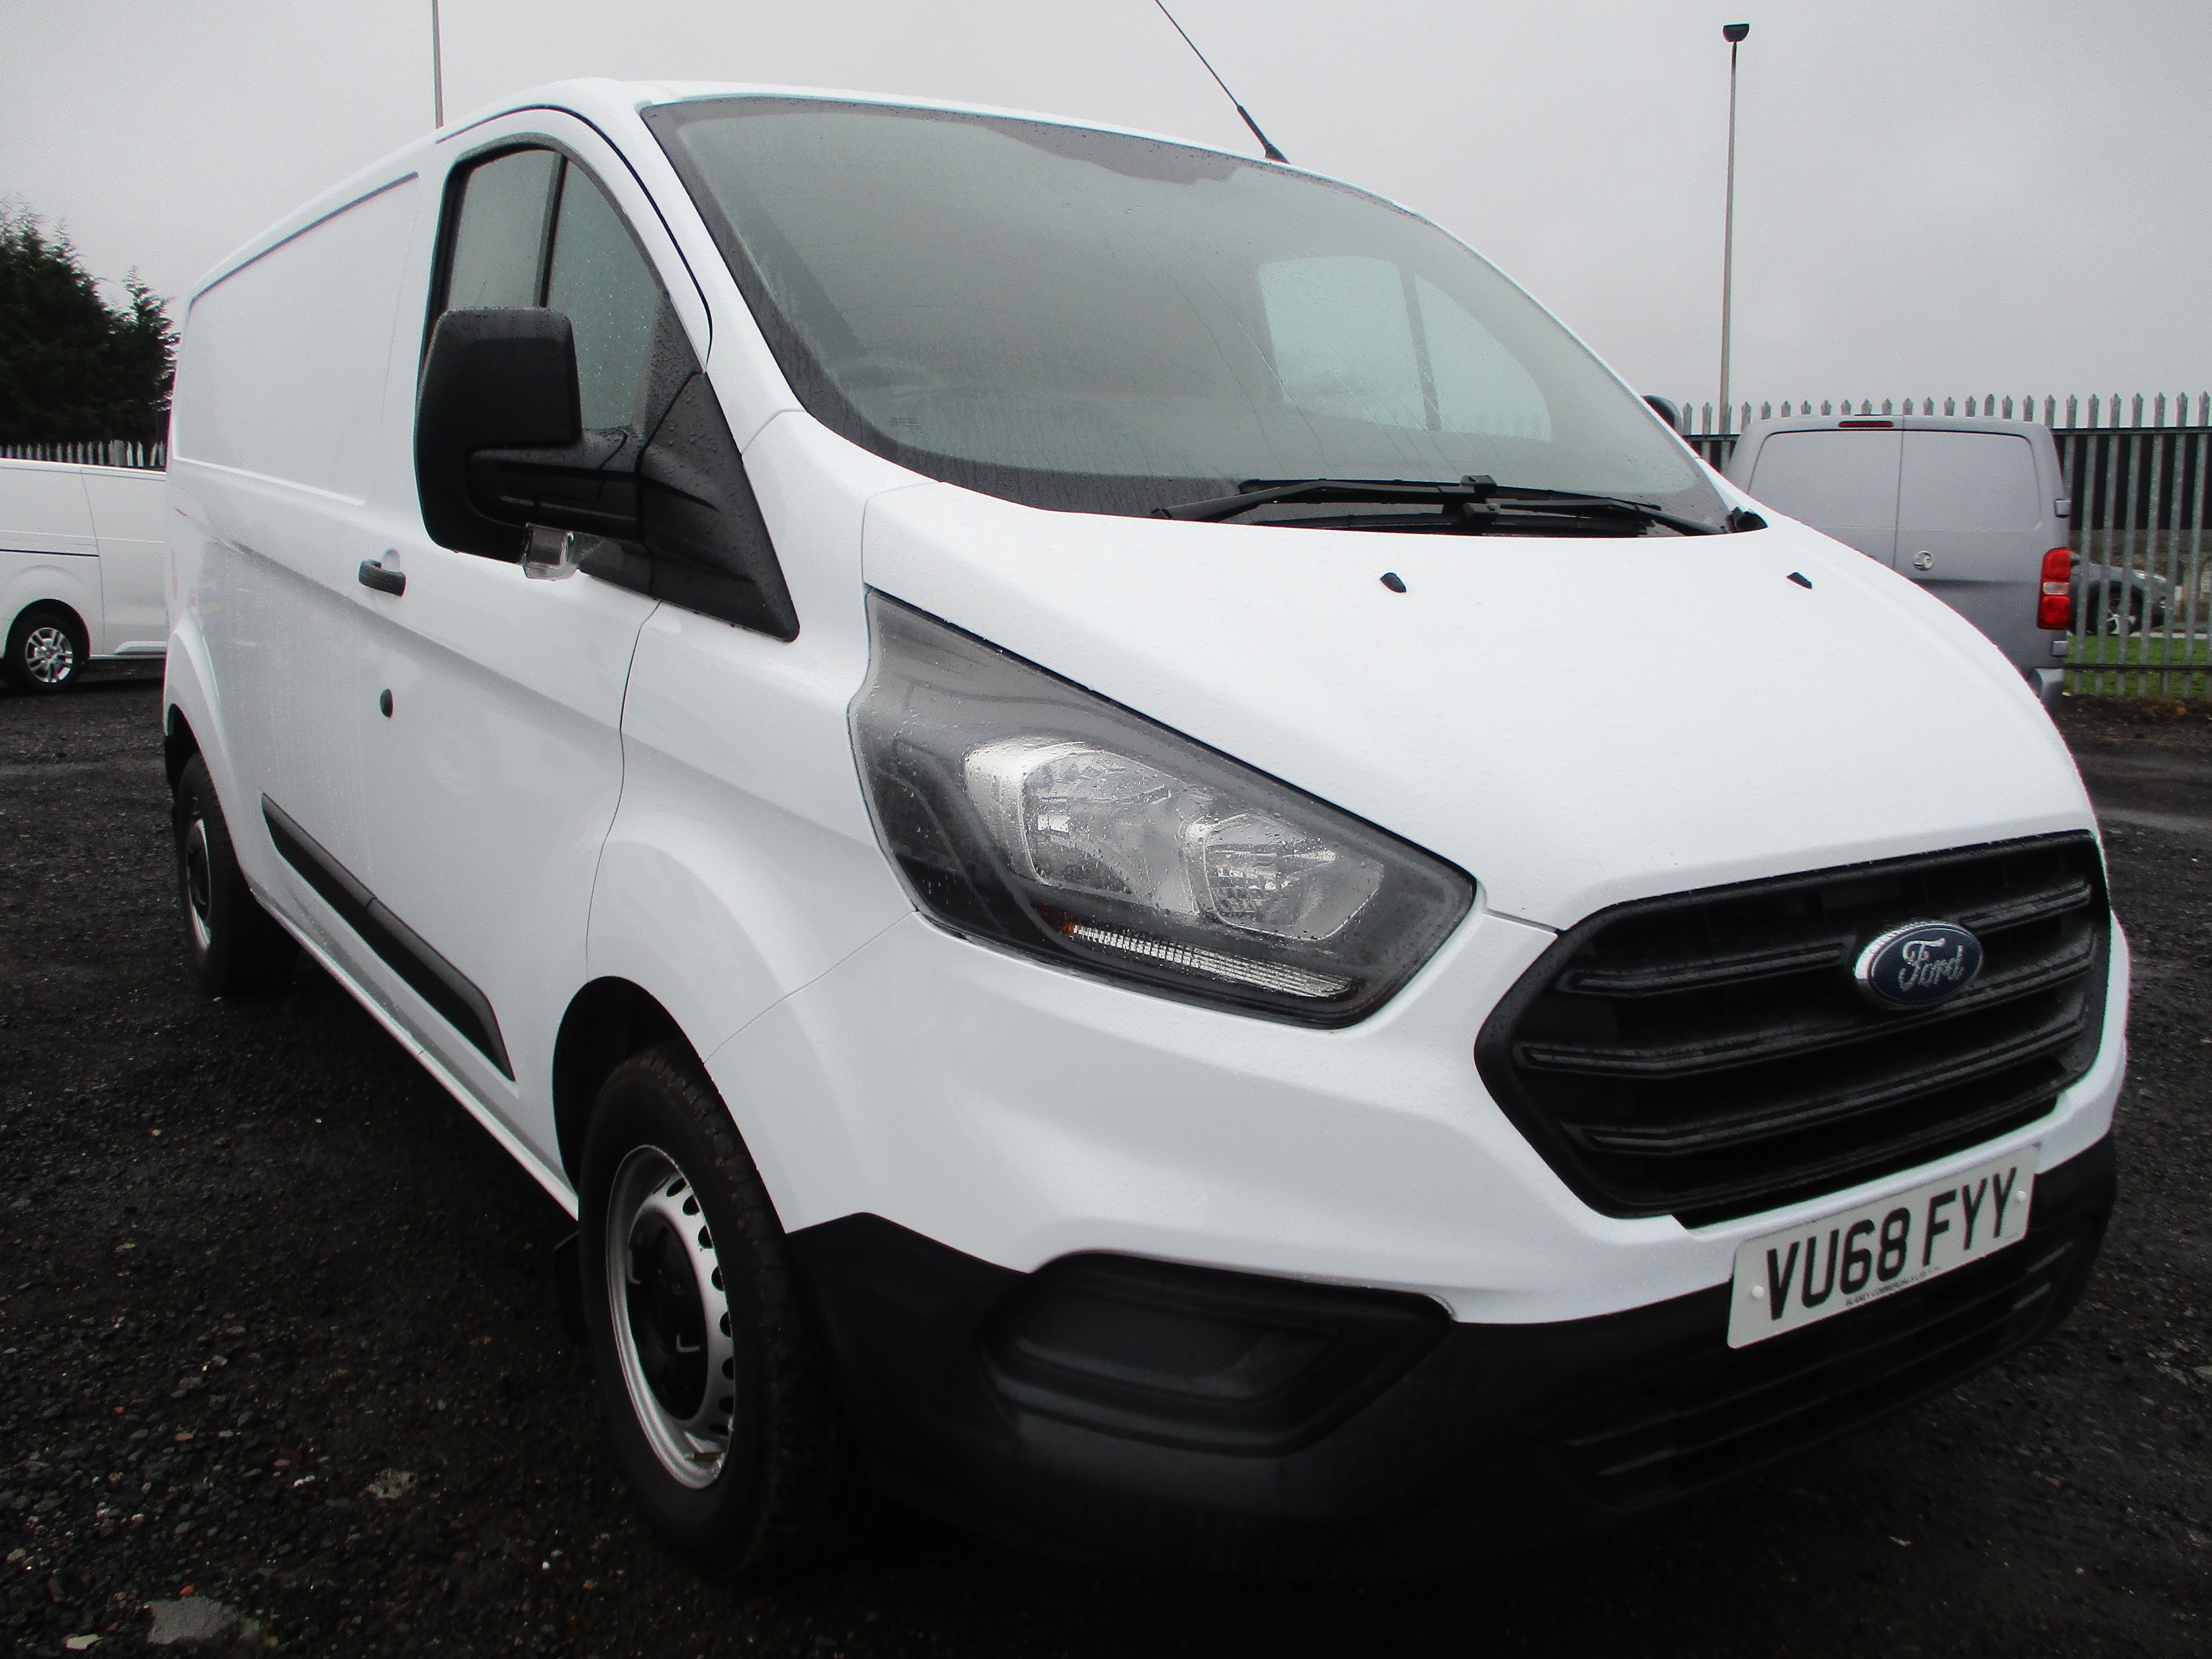 Ford Custom 300 L2H1 105PS 2.0TDCI LWB Low Roof(8 seater with Certificate of Conformity)